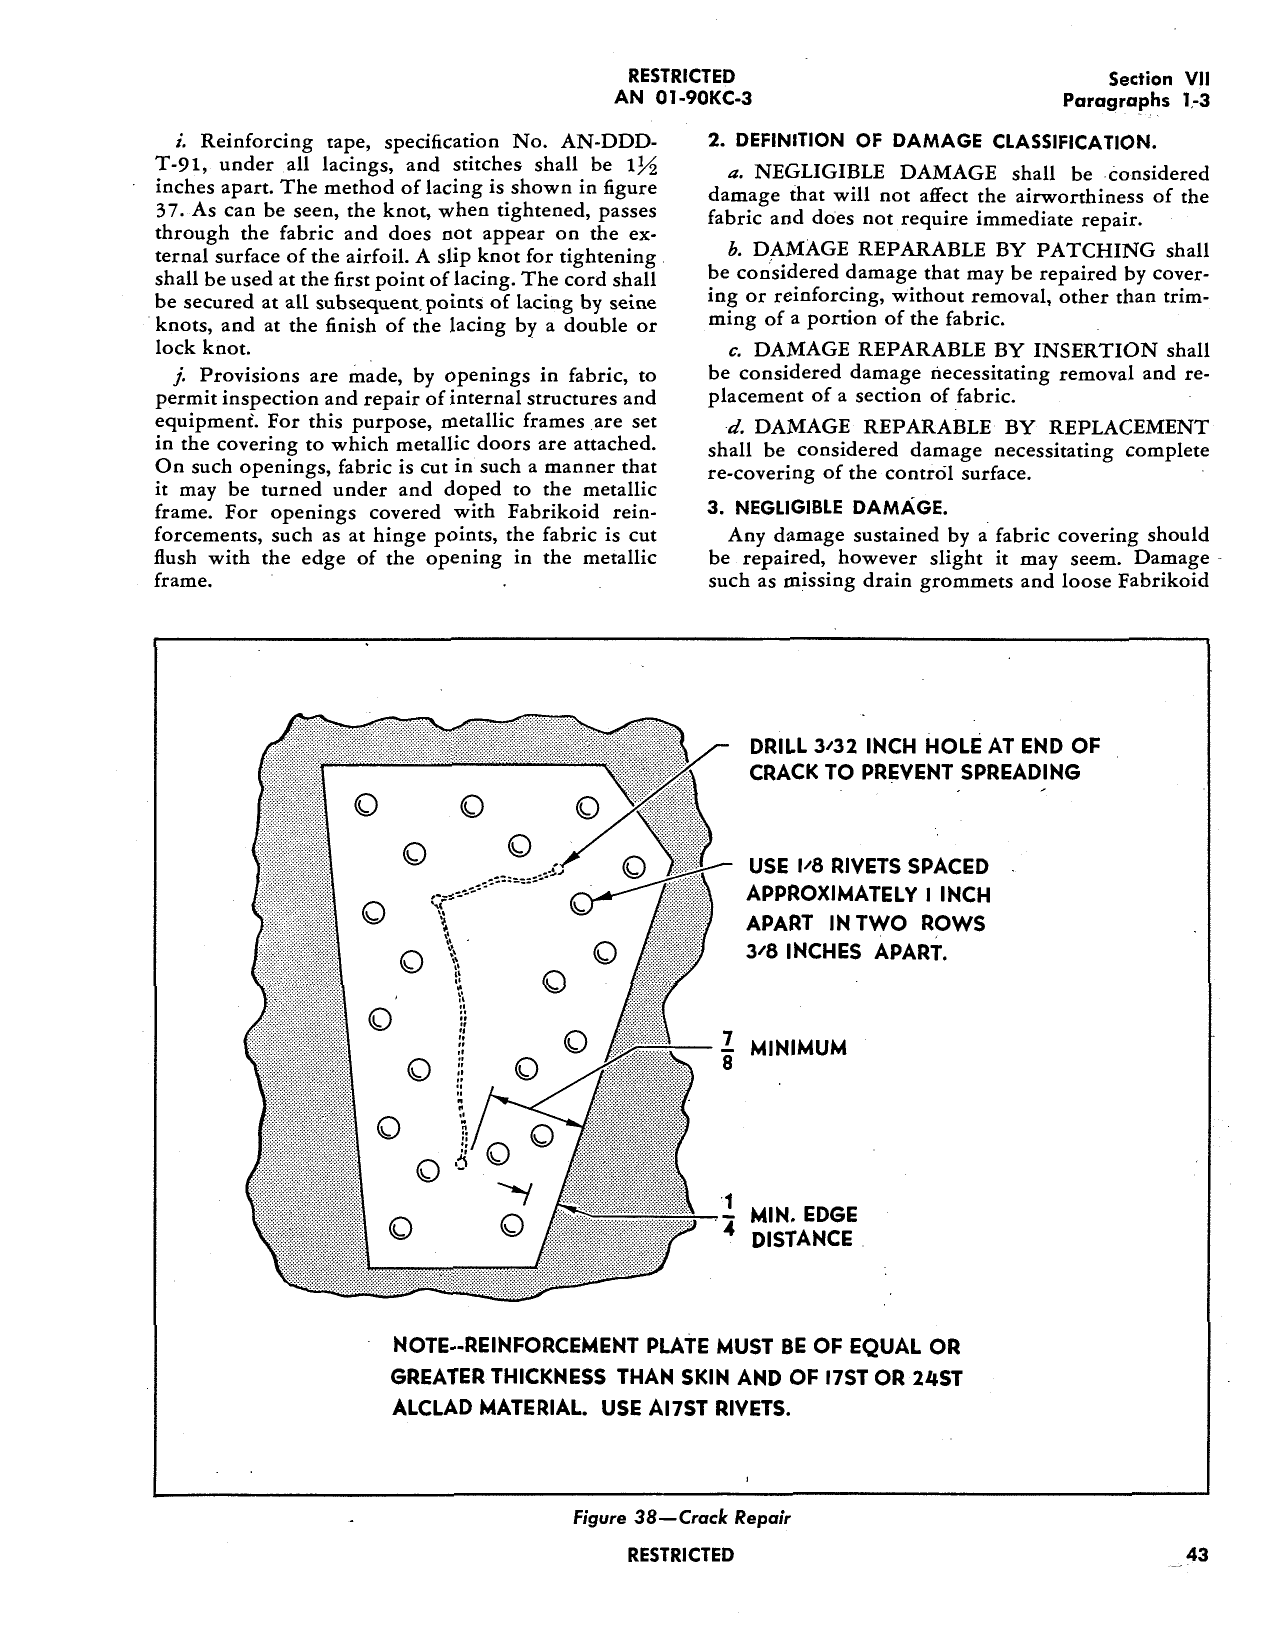 Sample page 47 from AirCorps Library document: Structural Repair Instructions - AT-11